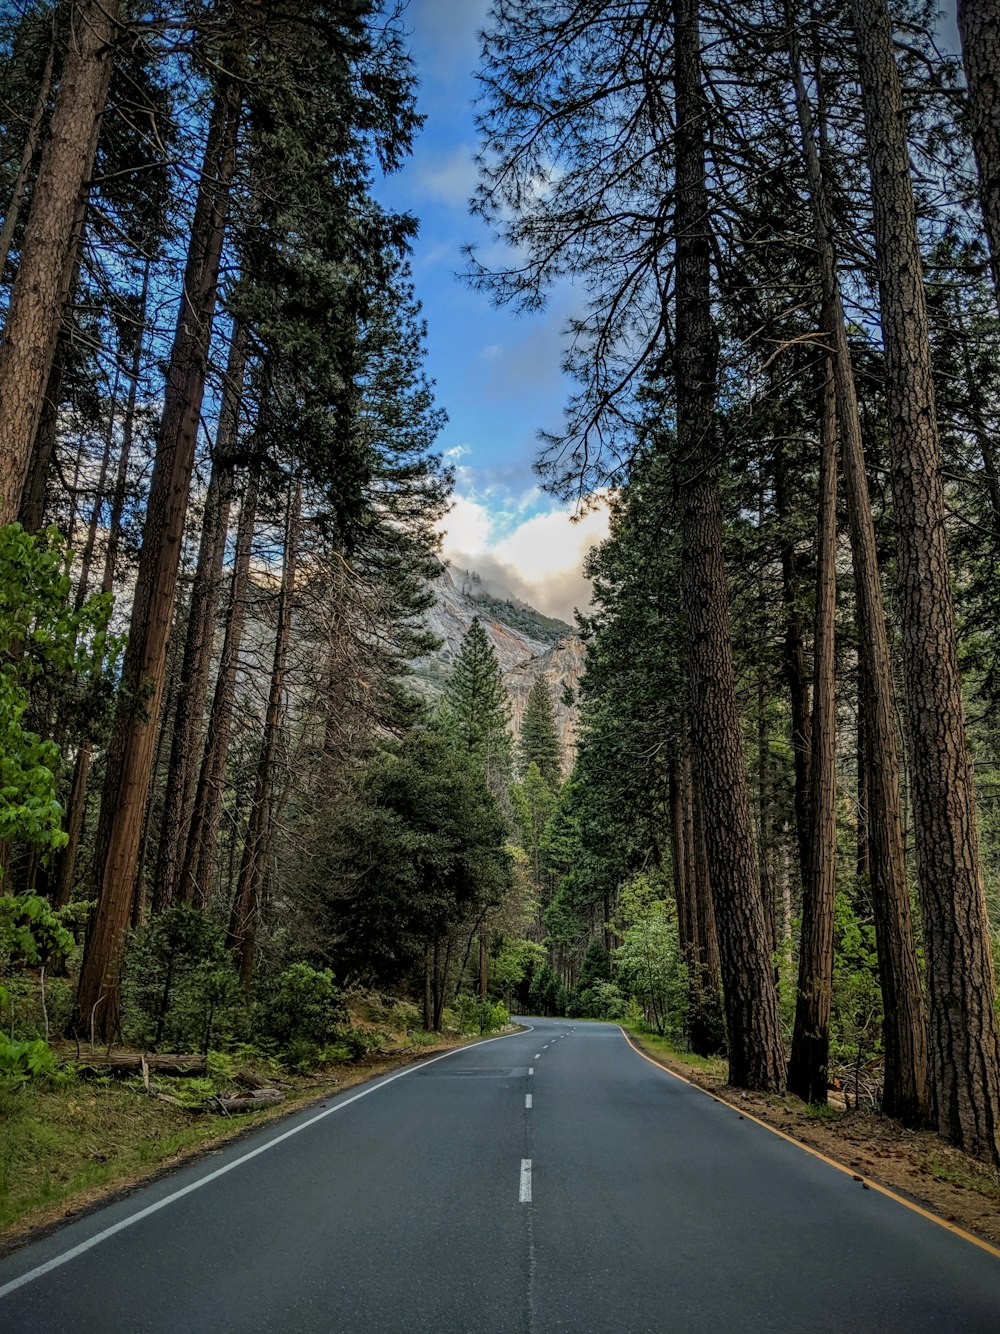 Tree Road Pictures | Download Free Images on Unsplash